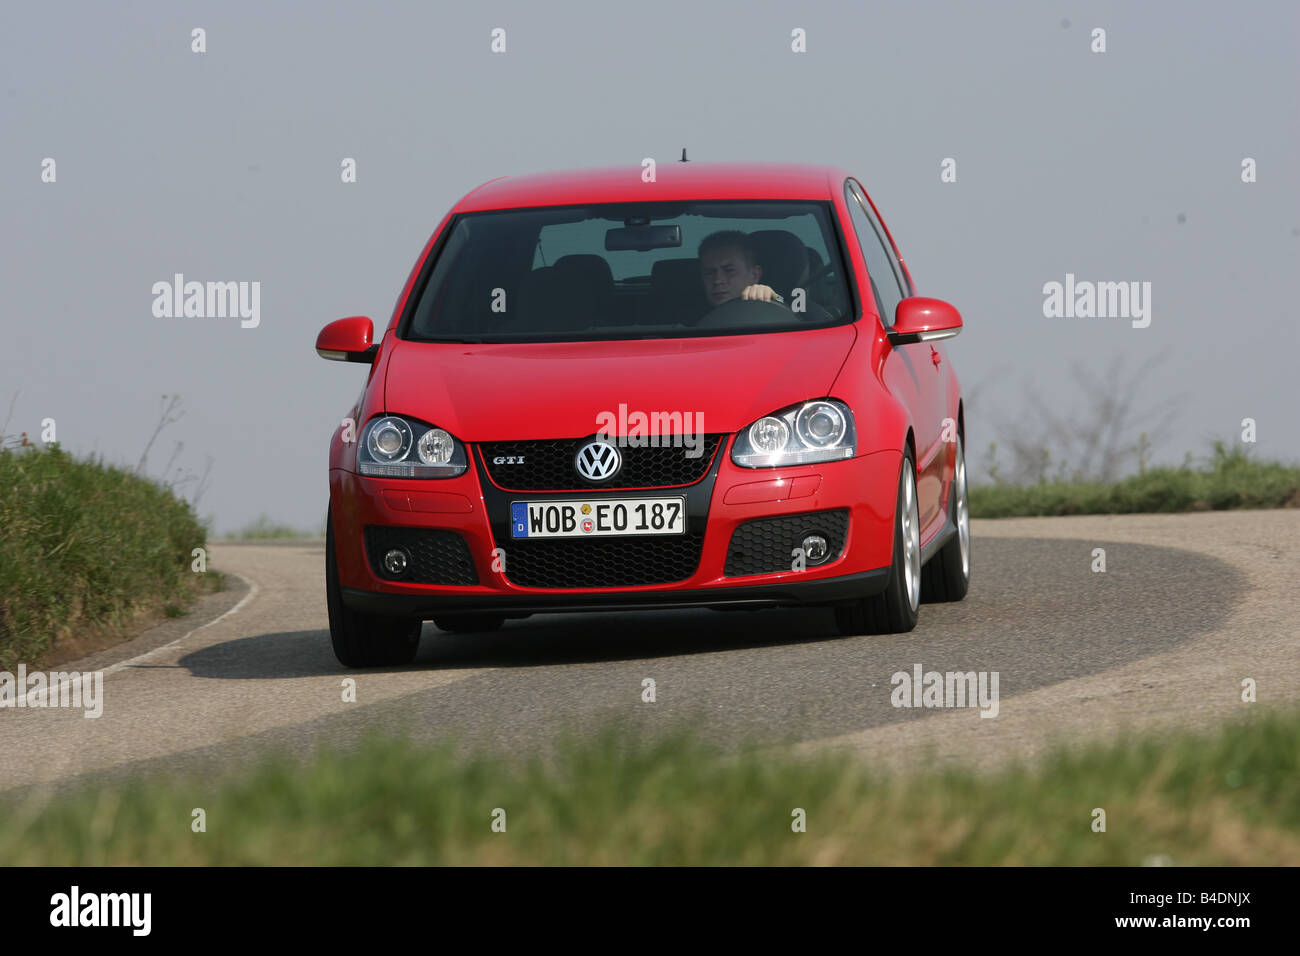 VW Volkswagen Golf GTI, model year 2004-, red, driving, diagonal from the front, frontal view, country road Stock Photo